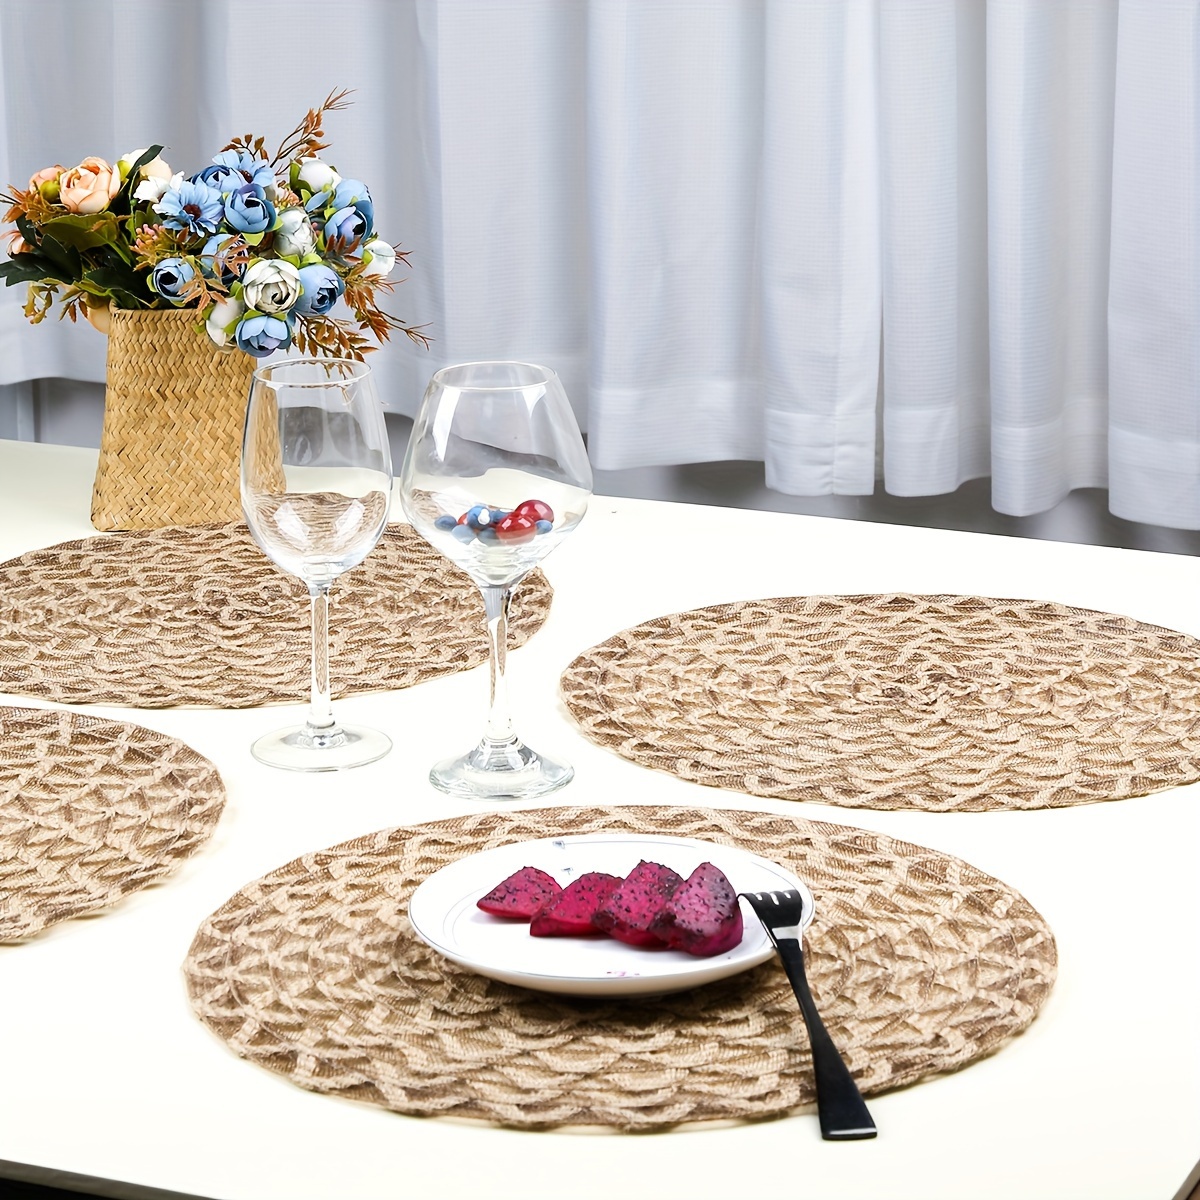 

4pcs Jute Round Placemats, Hand-woven Non-slip Coasters For Dining Table, Boho Braided Design, Nordic Style Table Mats For Restaurant, Wedding, Party & Christmas Decoration - Hand Wash Only